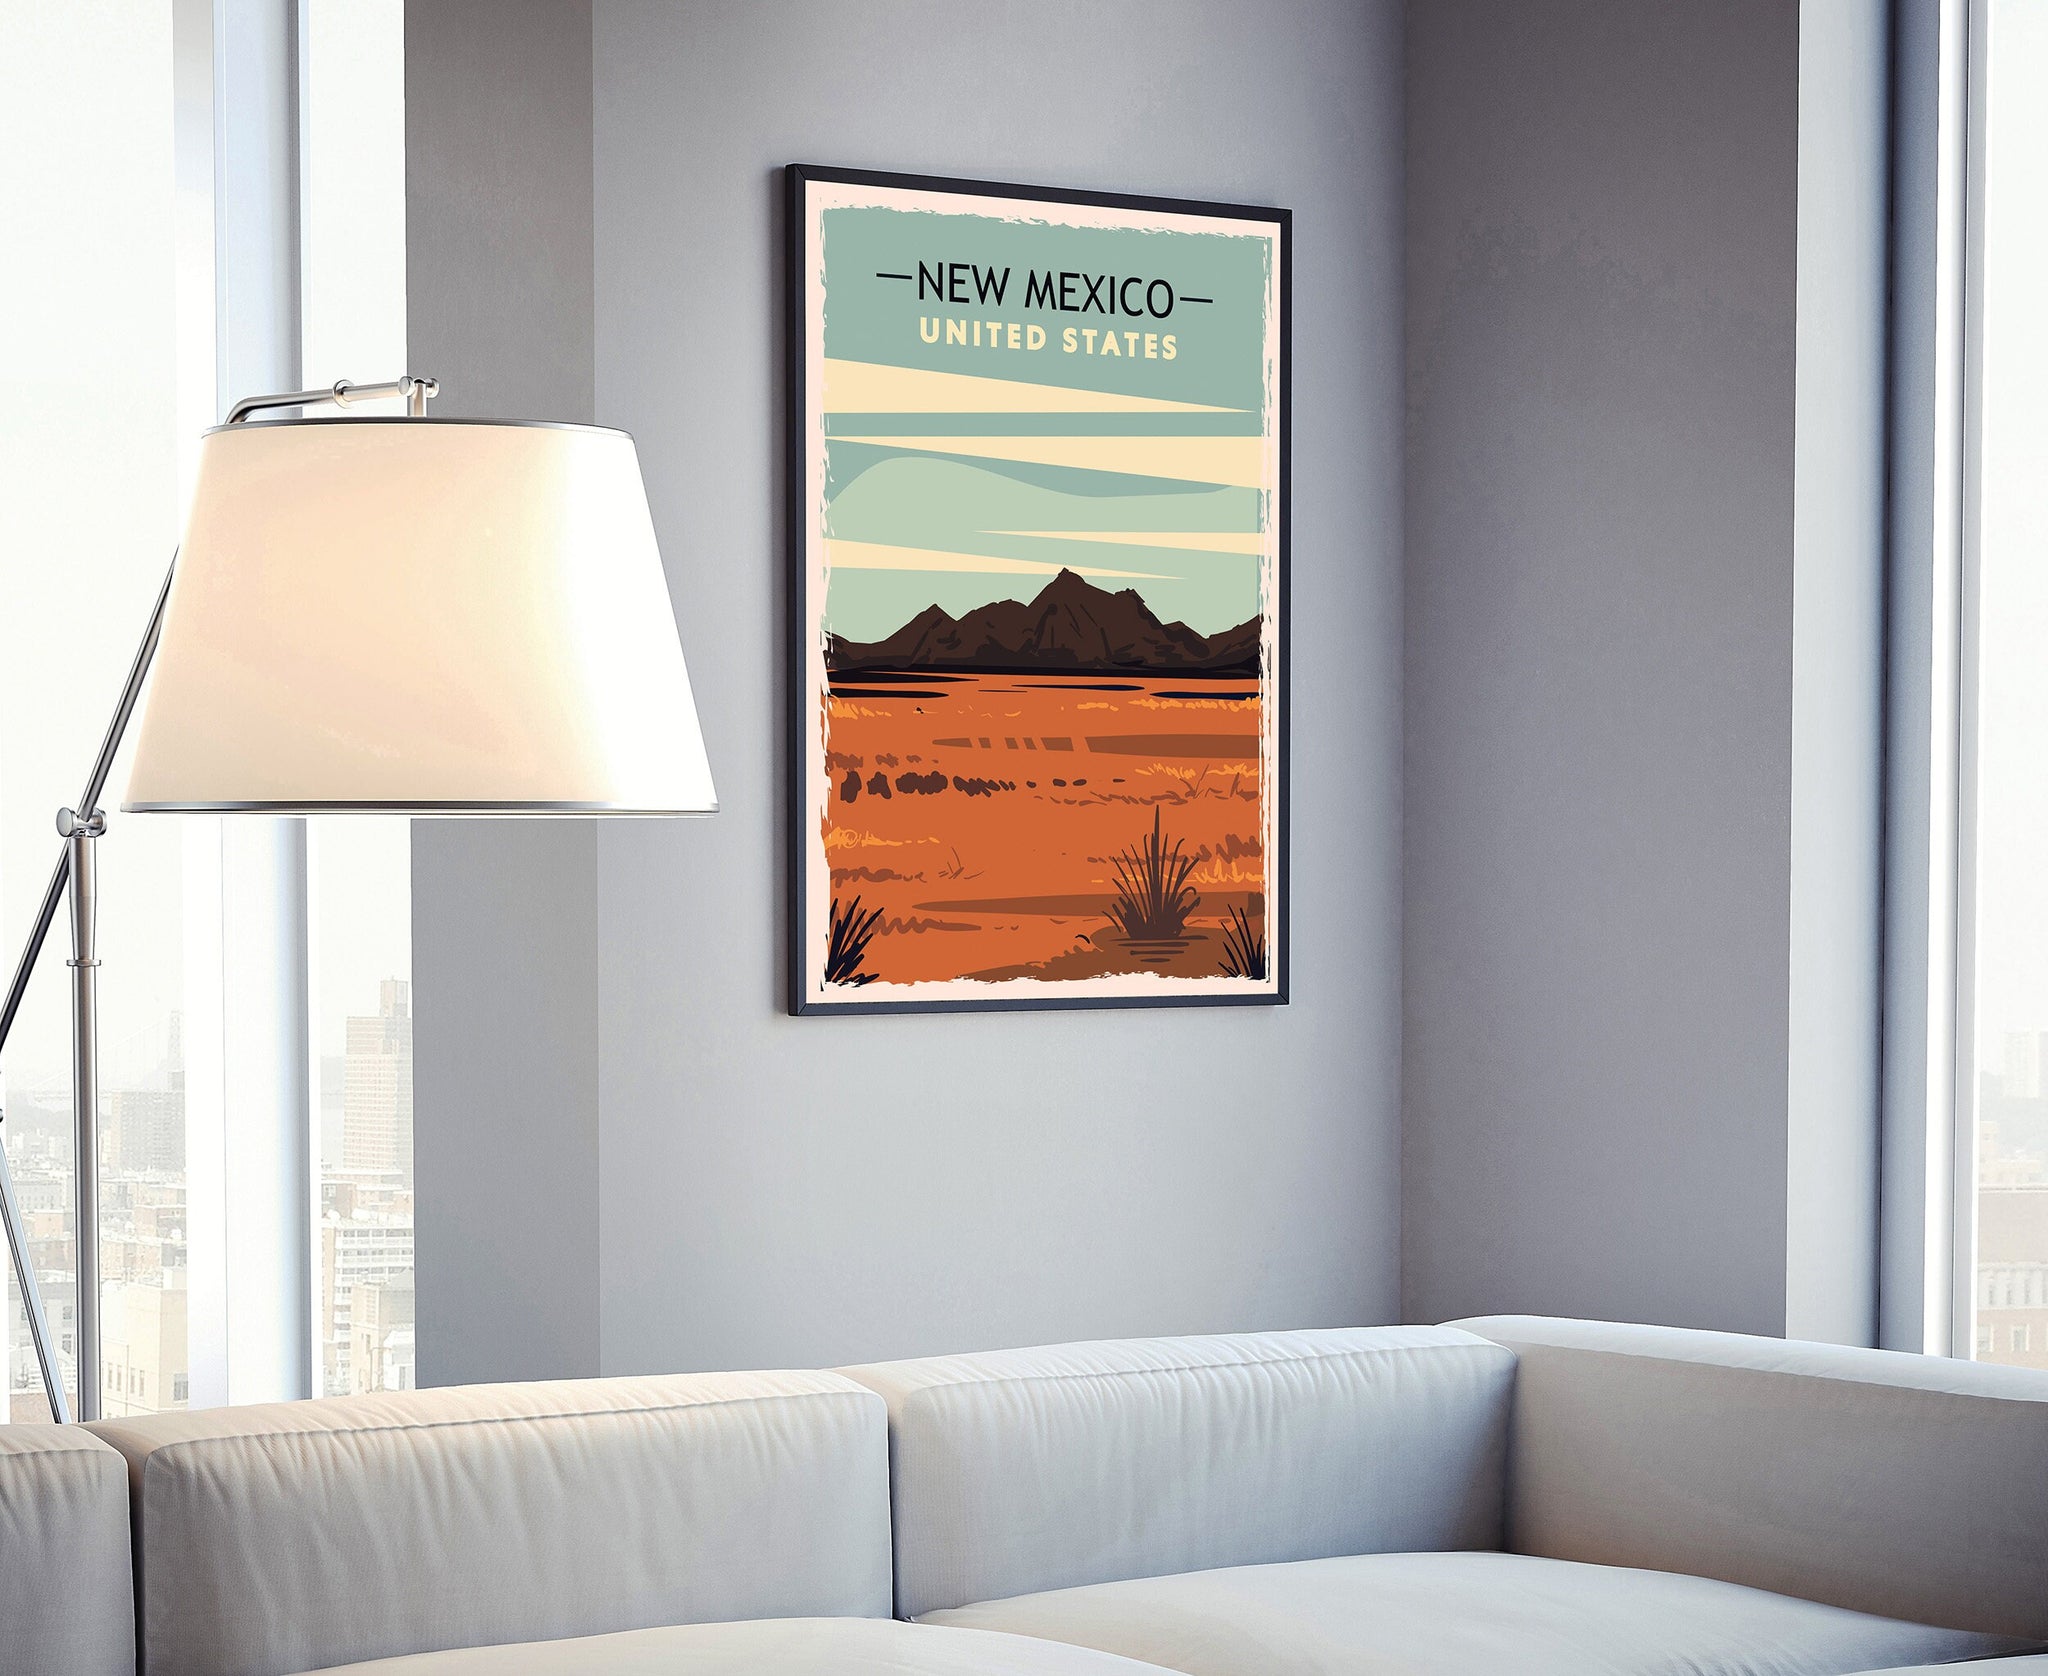 New Mexico Vintage Rustic Poster Print, Retro Style Travel Poster